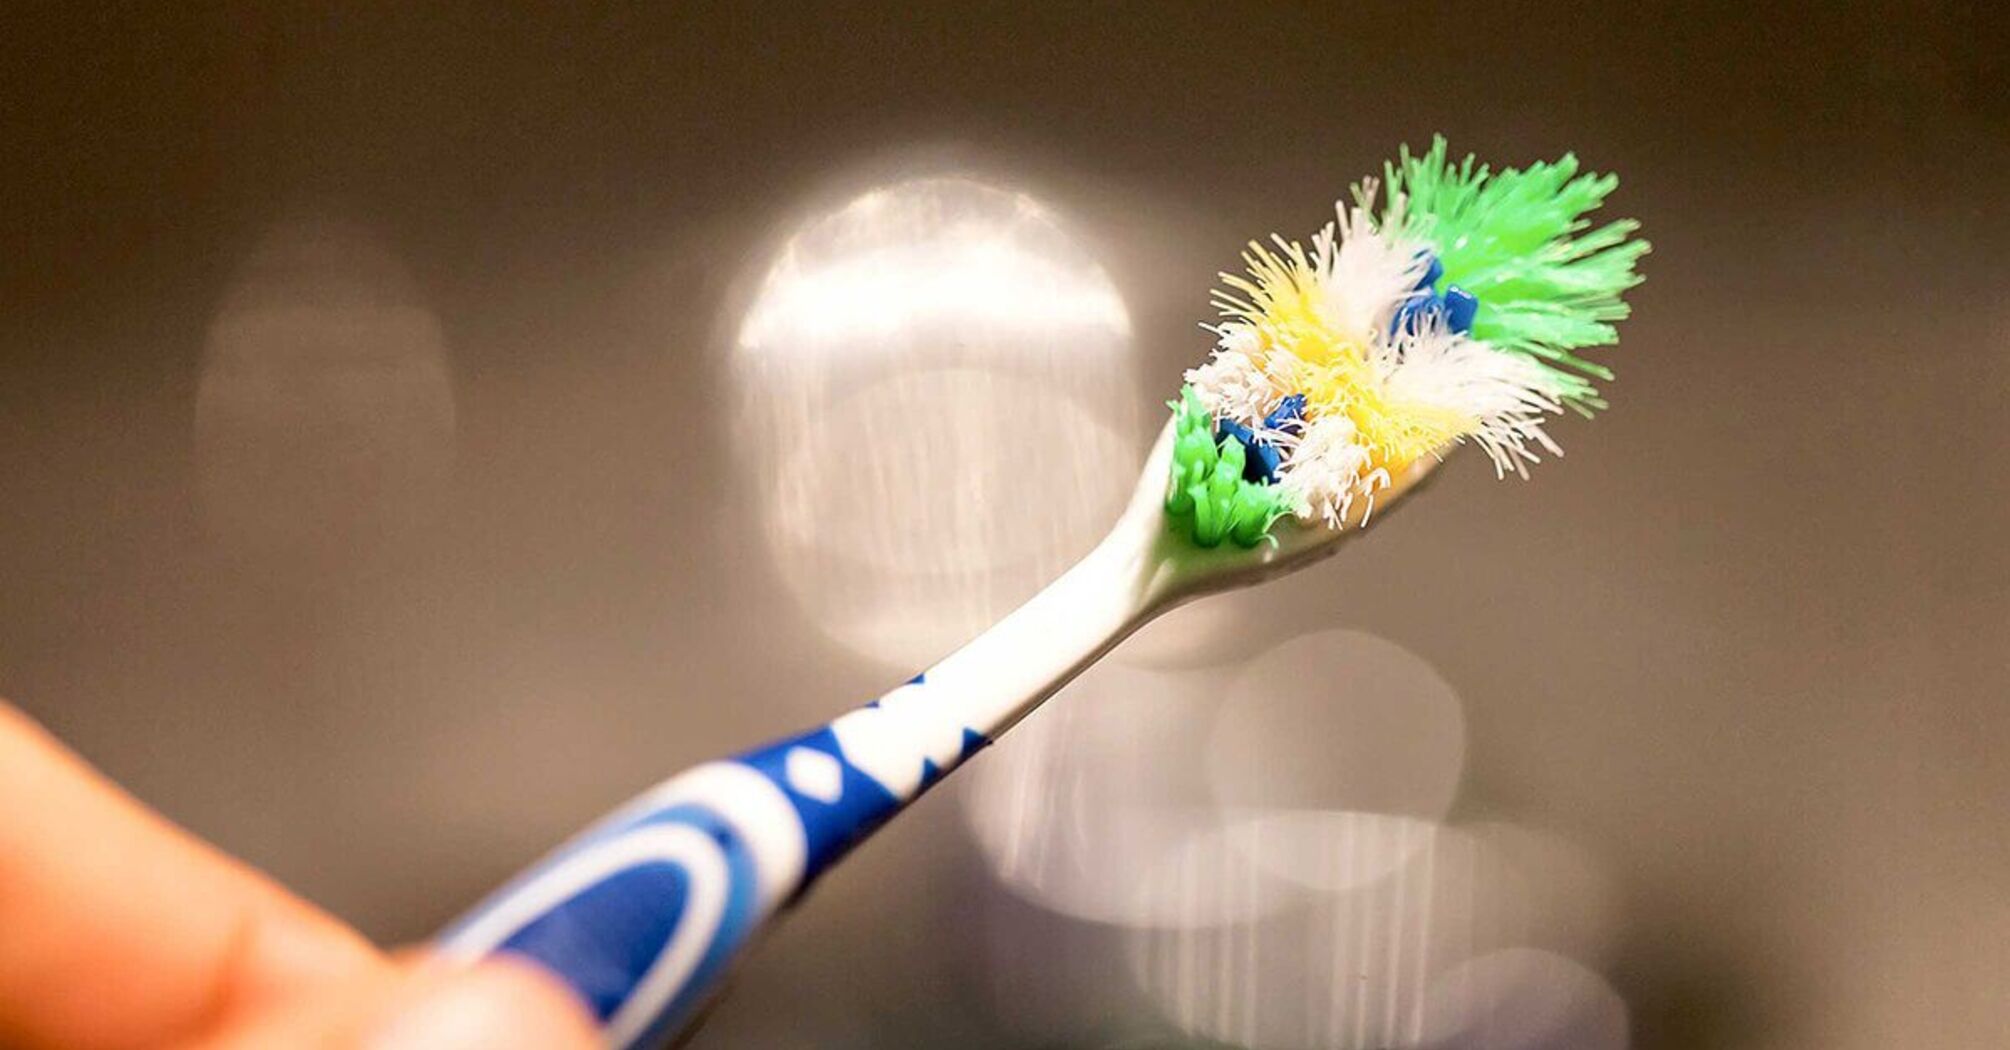 How to use an old toothbrush in everyday life